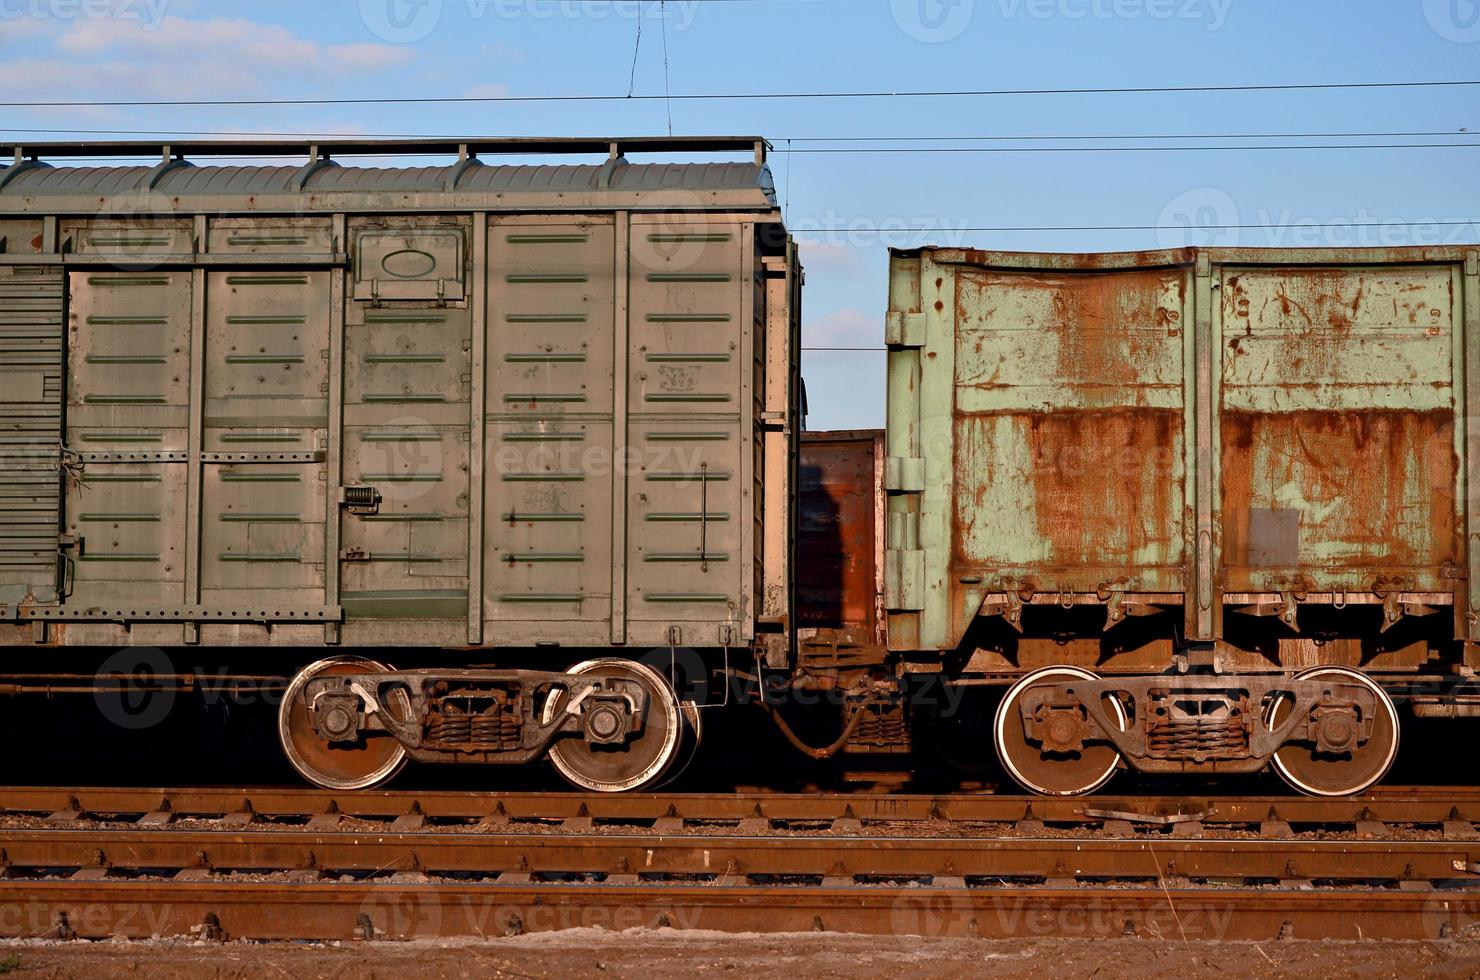 Parts of the freight railcar photo